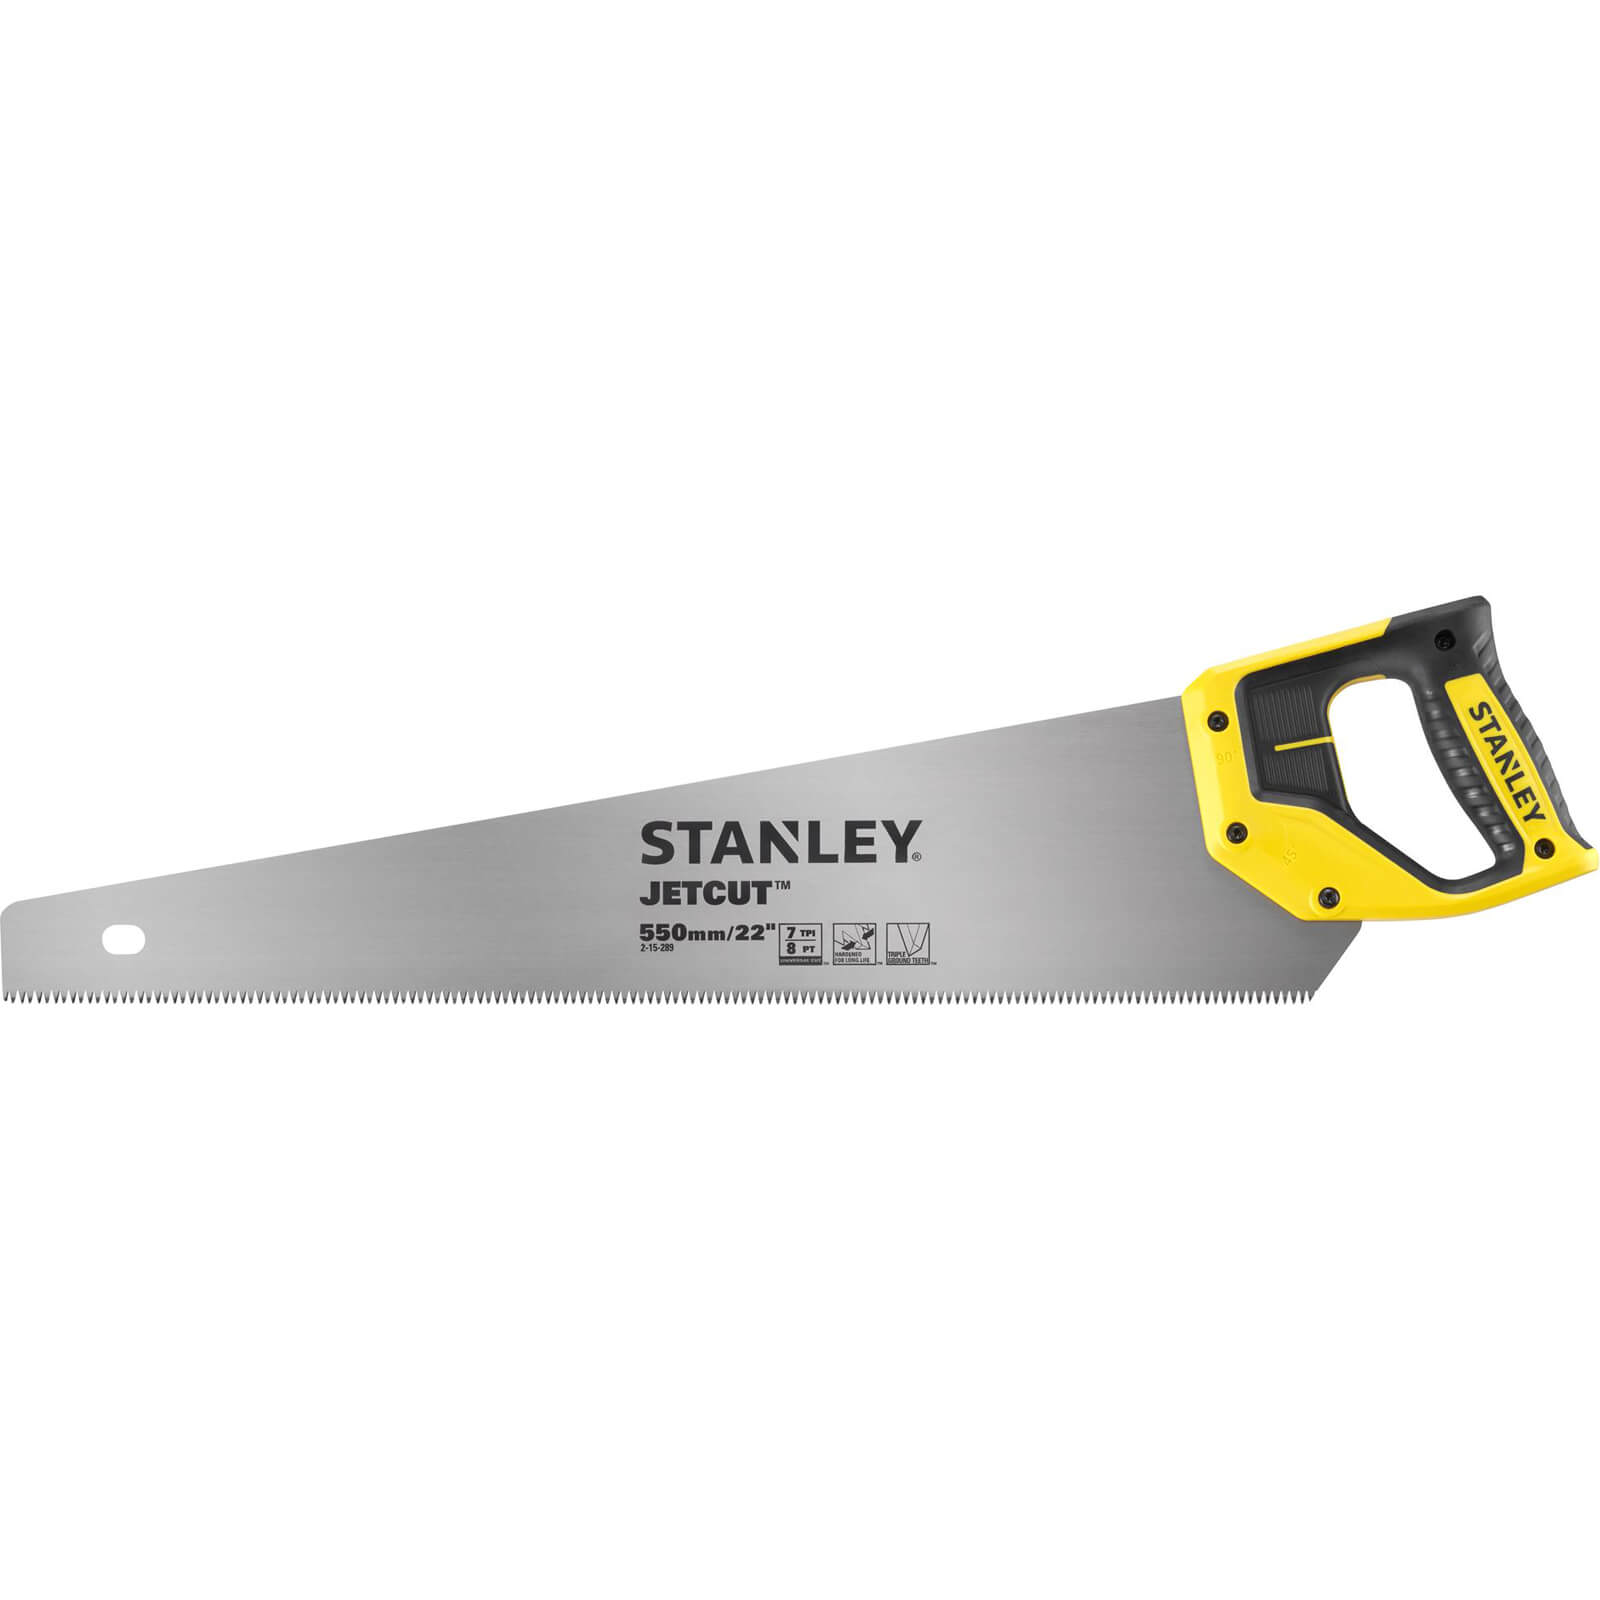 Image of Stanley FatMax Heavy Duty Hand Saw 22" / 550mm 7tpi